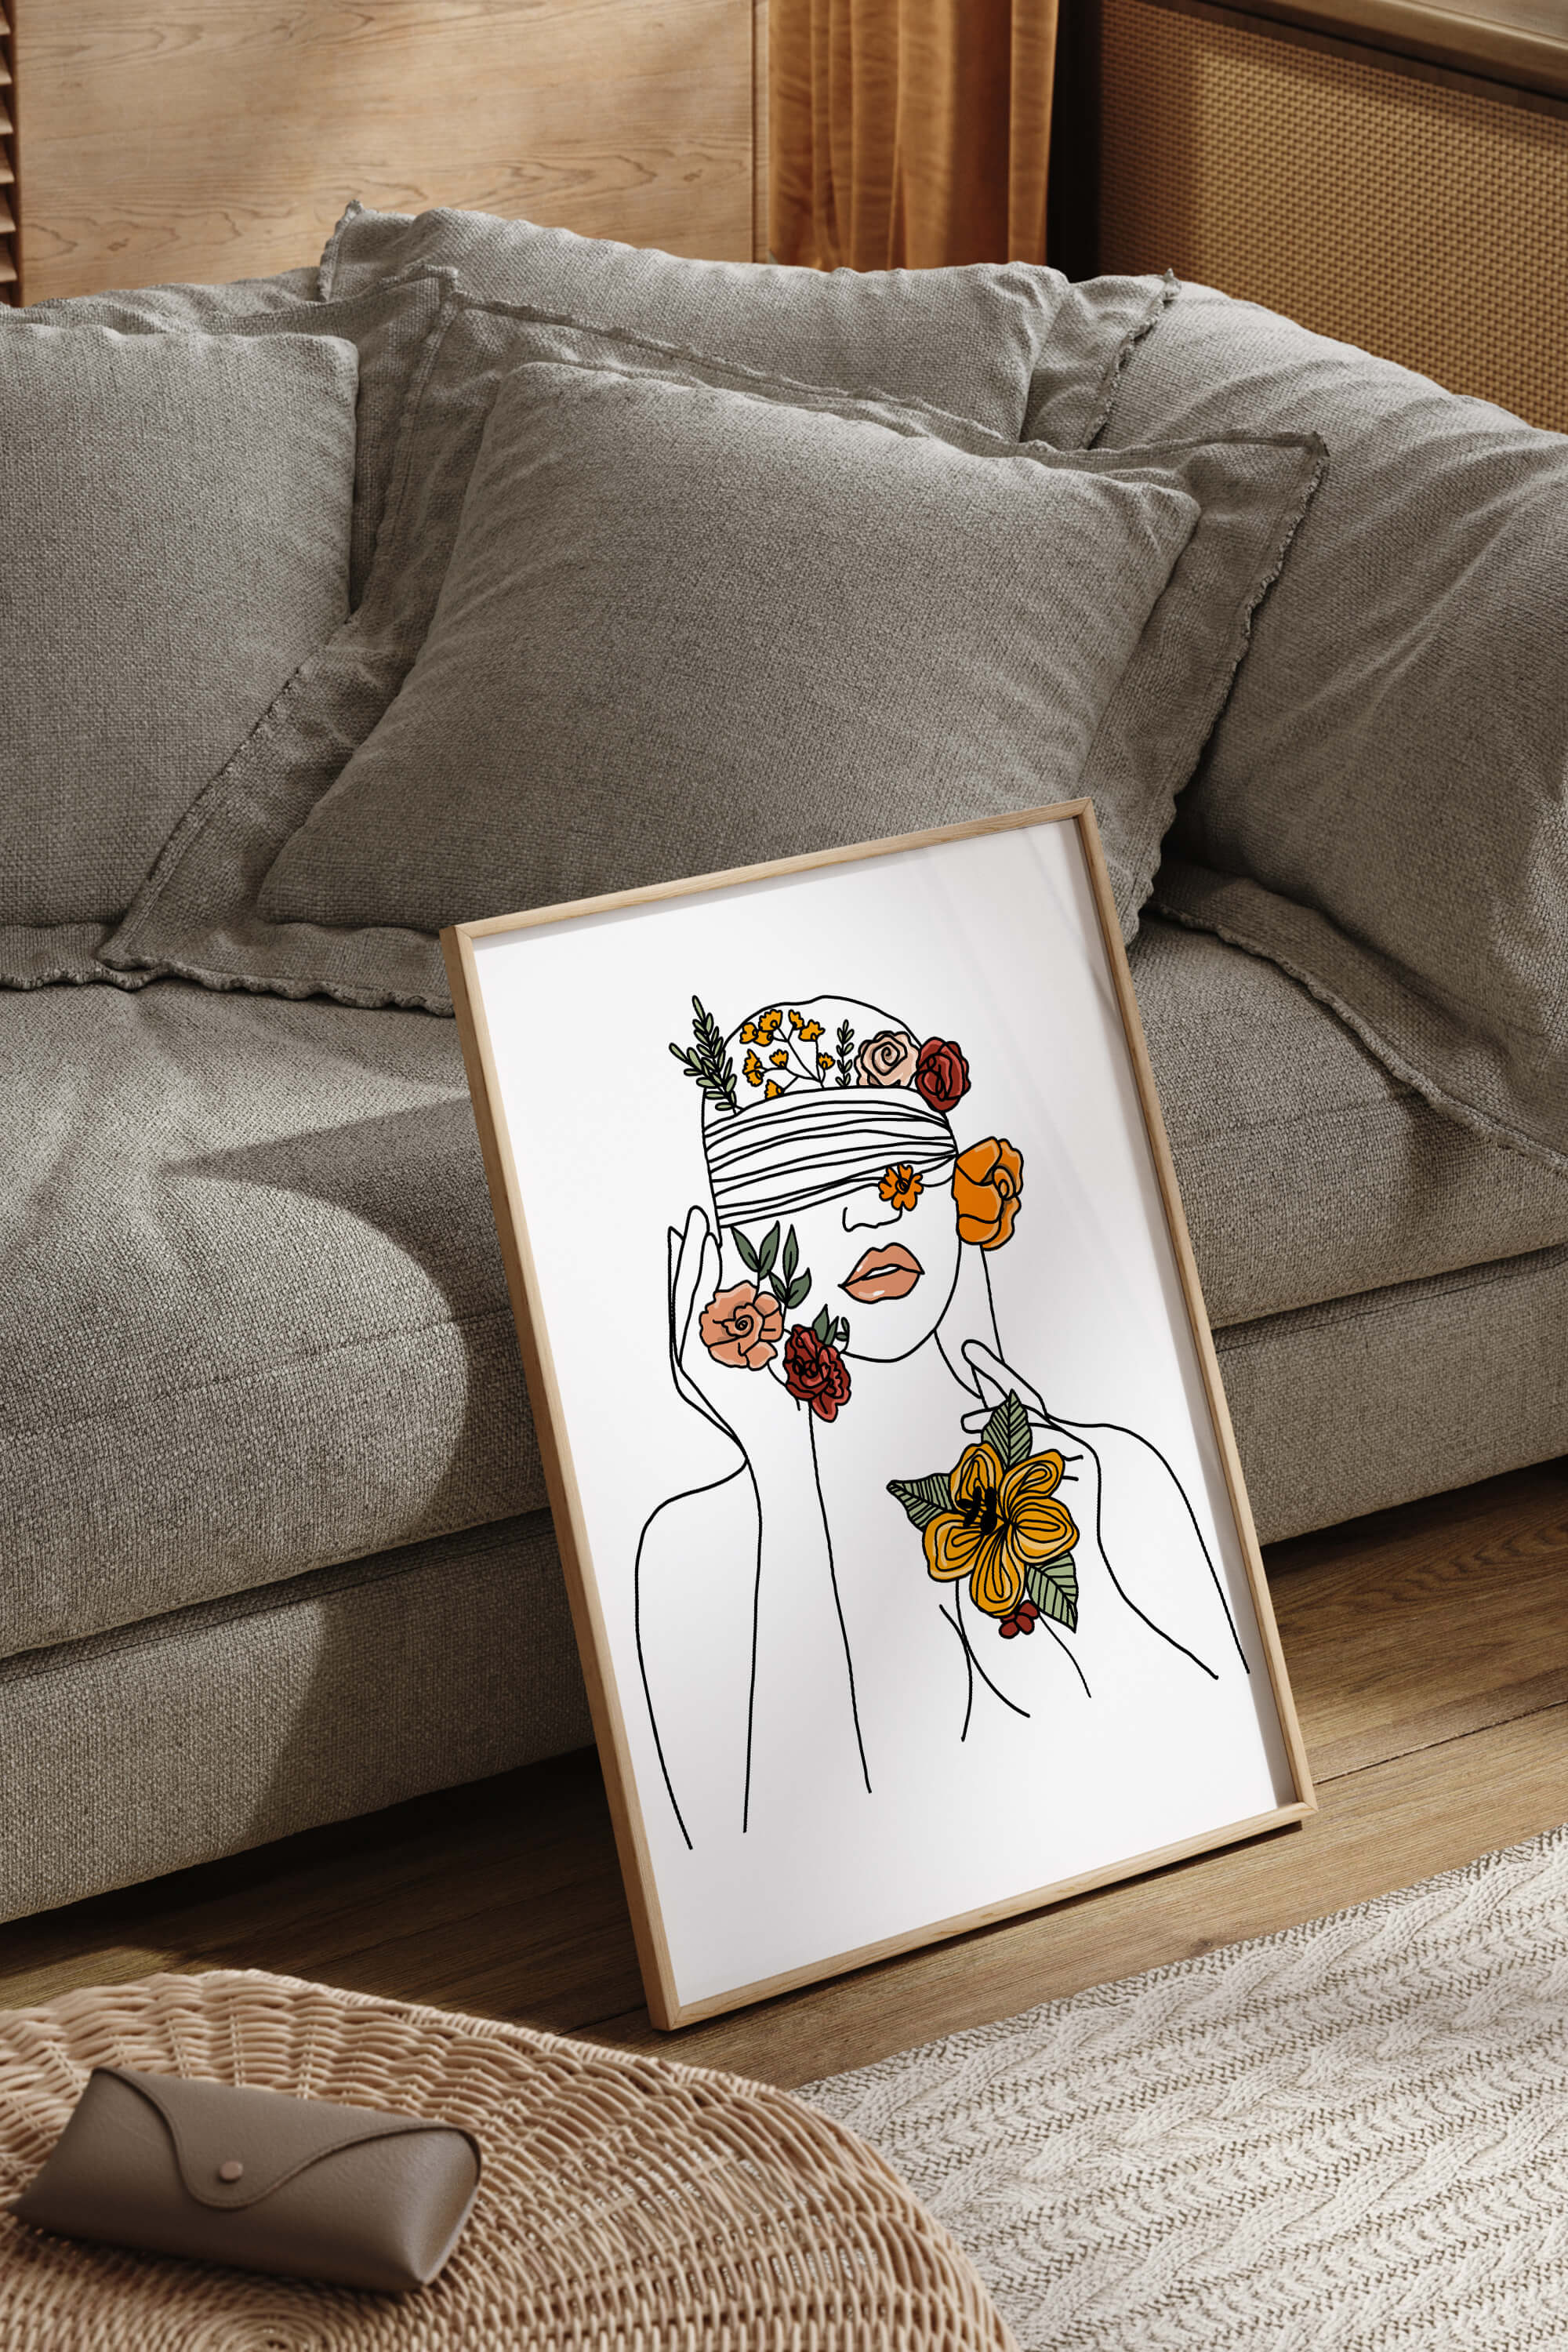 Experience the emotional resonance of this art print—a canvas of love and beauty. The elegant depiction creates an intimate atmosphere, making it a perfect addition to your bedroom. Let this artwork reflect your unique style.